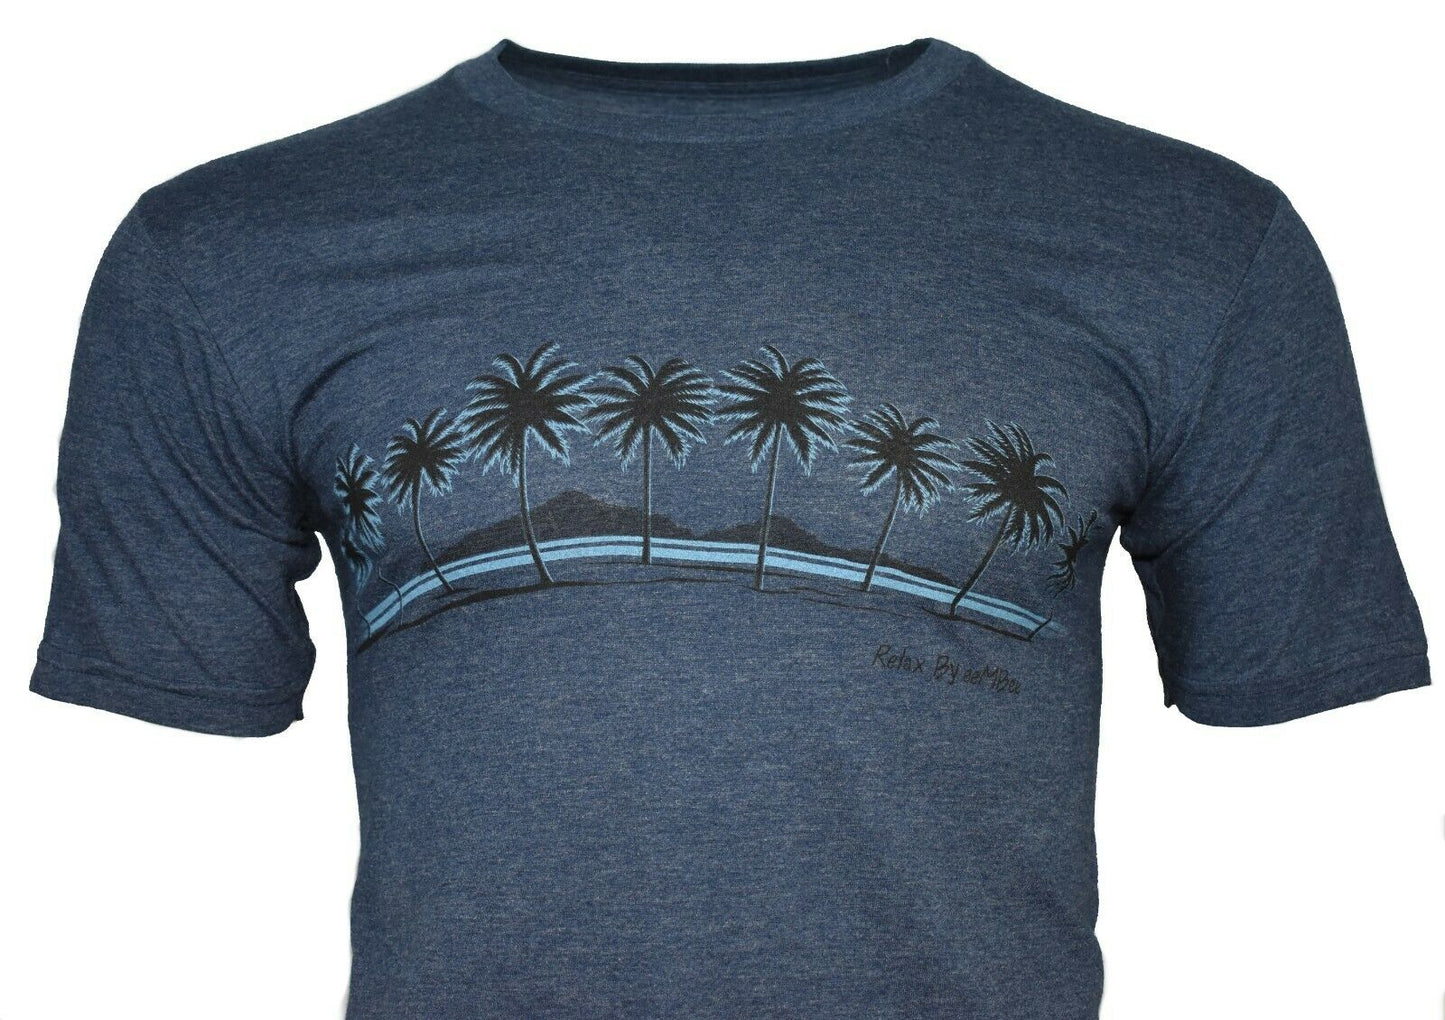 Men's T-Shirt Sunset Beach Palm Trees No worries Here By eeMBee